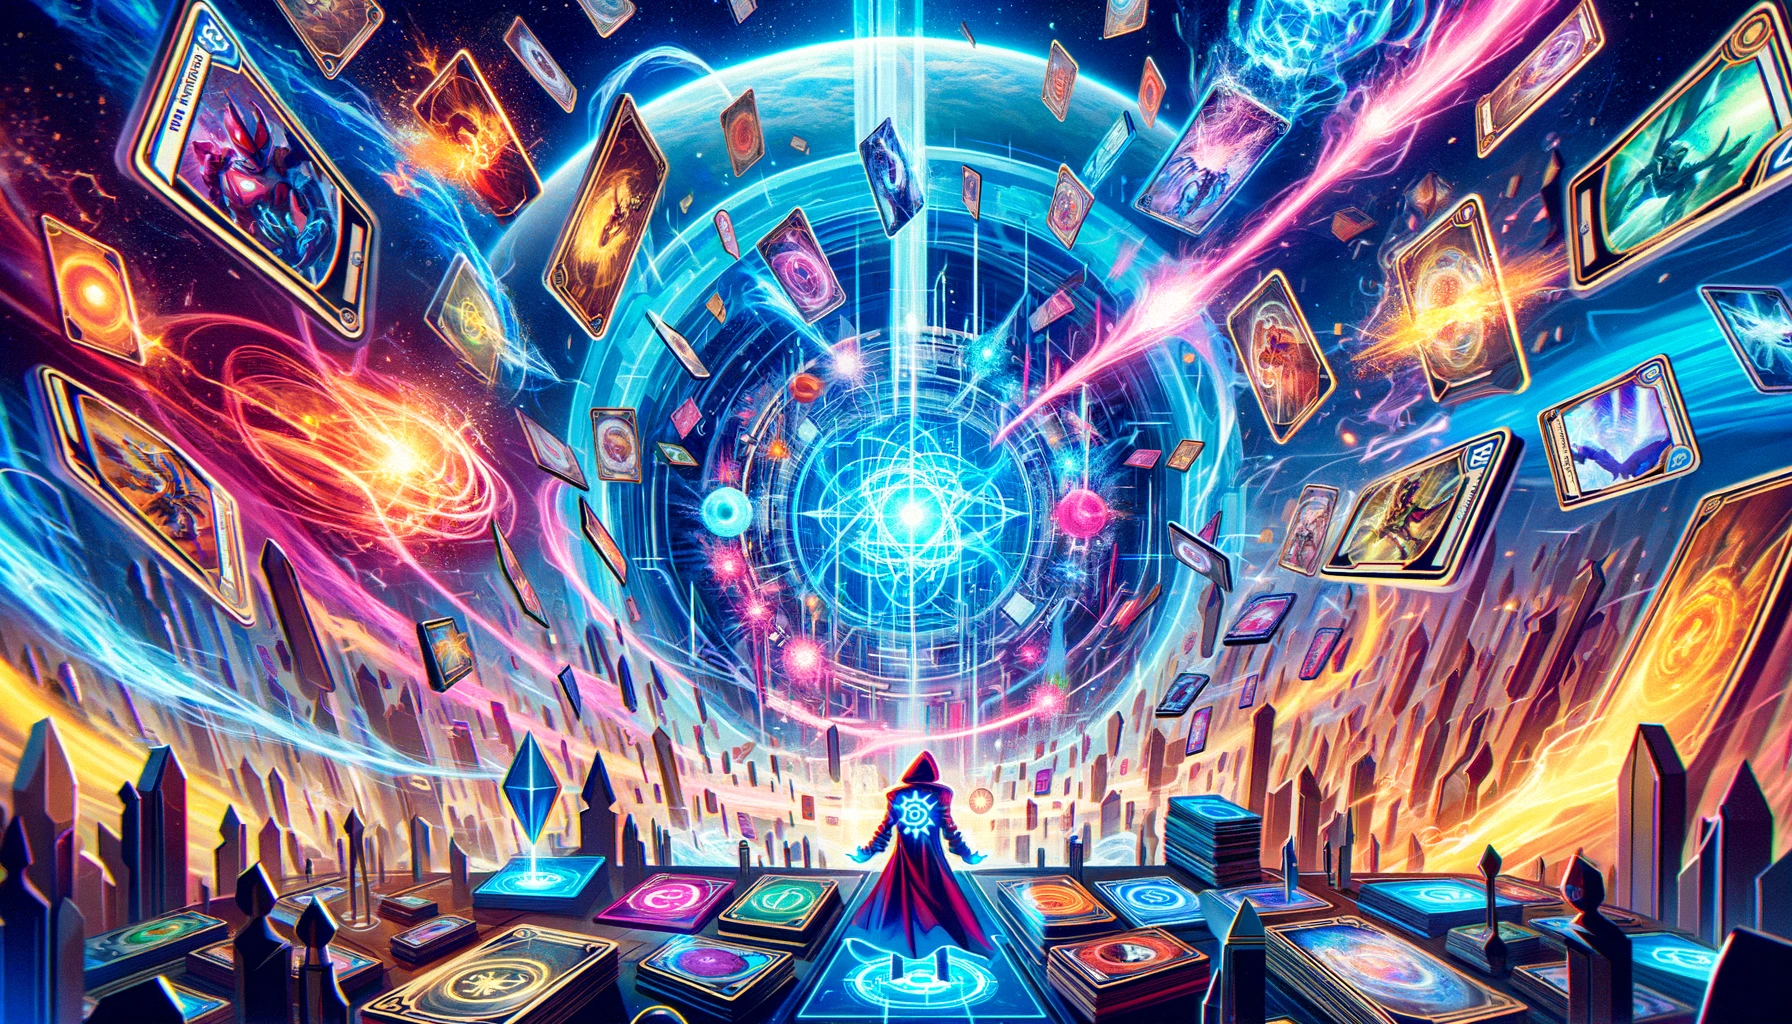 Strategic card battle scene set in Marvel Snap’s Panoptichron, with cards from various dimensions clashing amid portals and energy explosions.